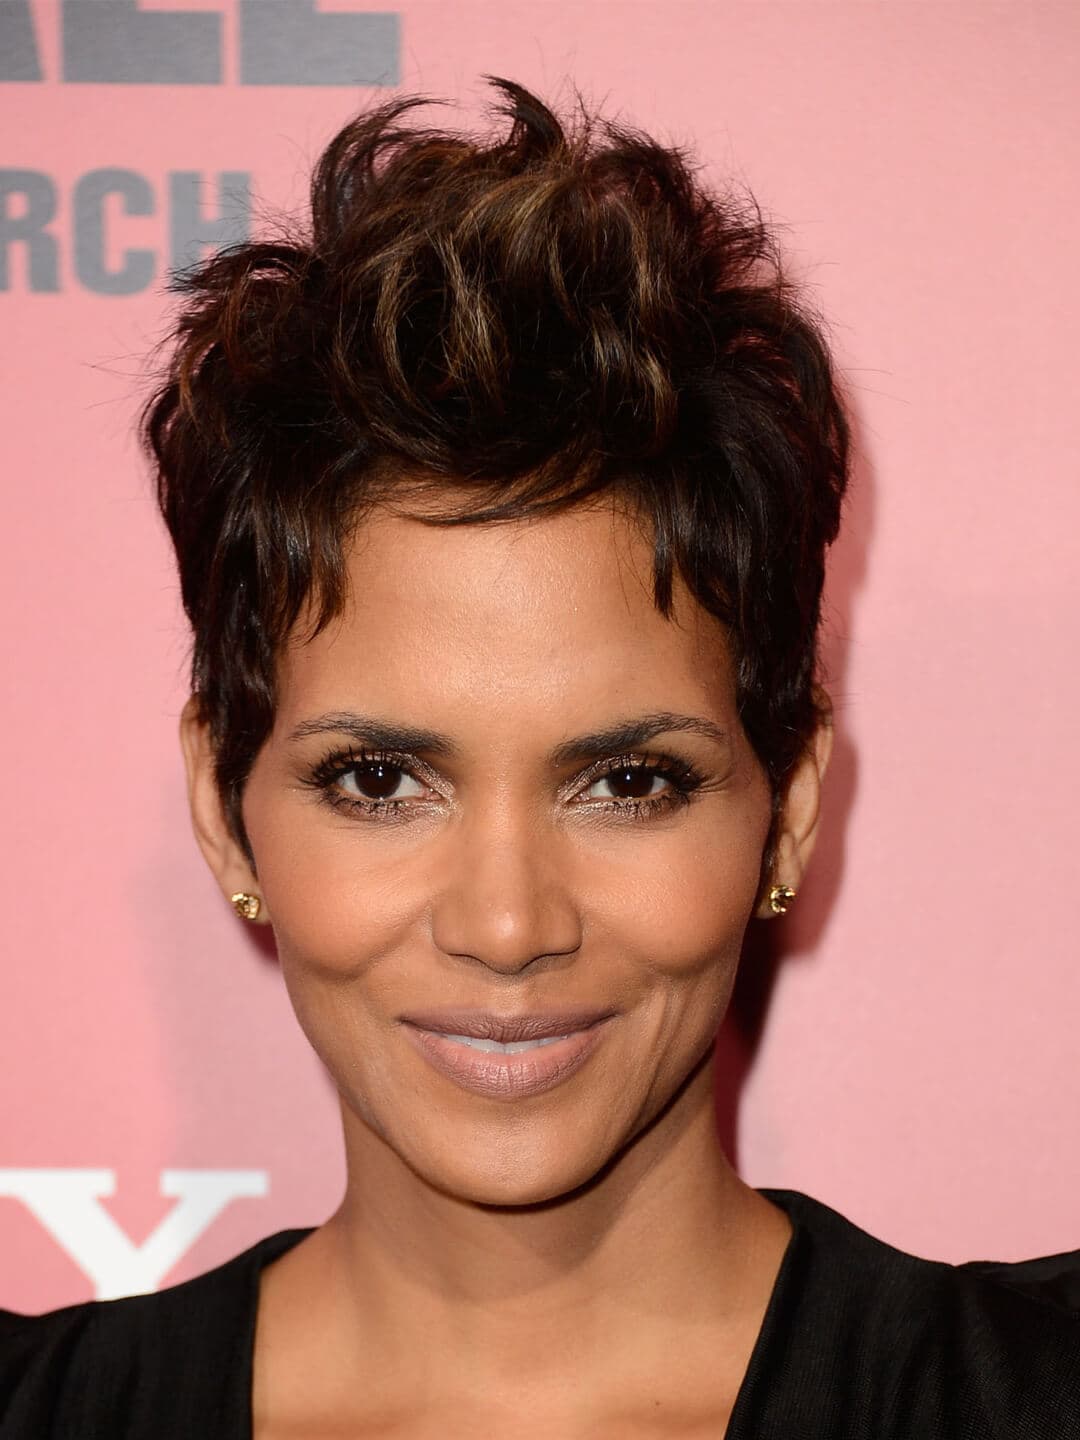 Halle Berry rocking a textured pixie cut hairstyle